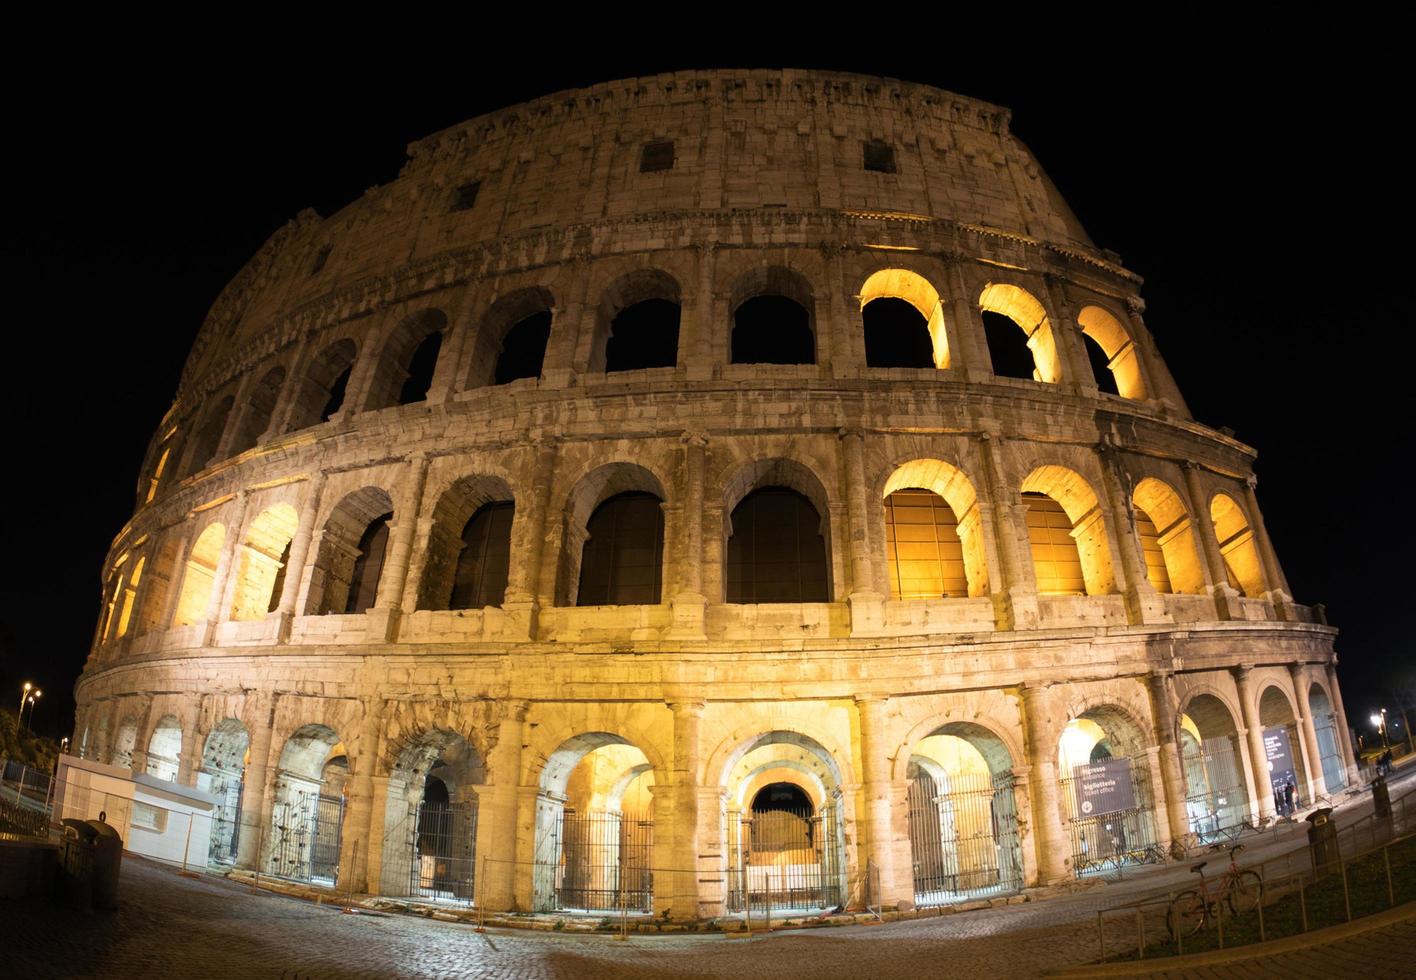 Rome, Italy, 2020 - Colosseum at night photo